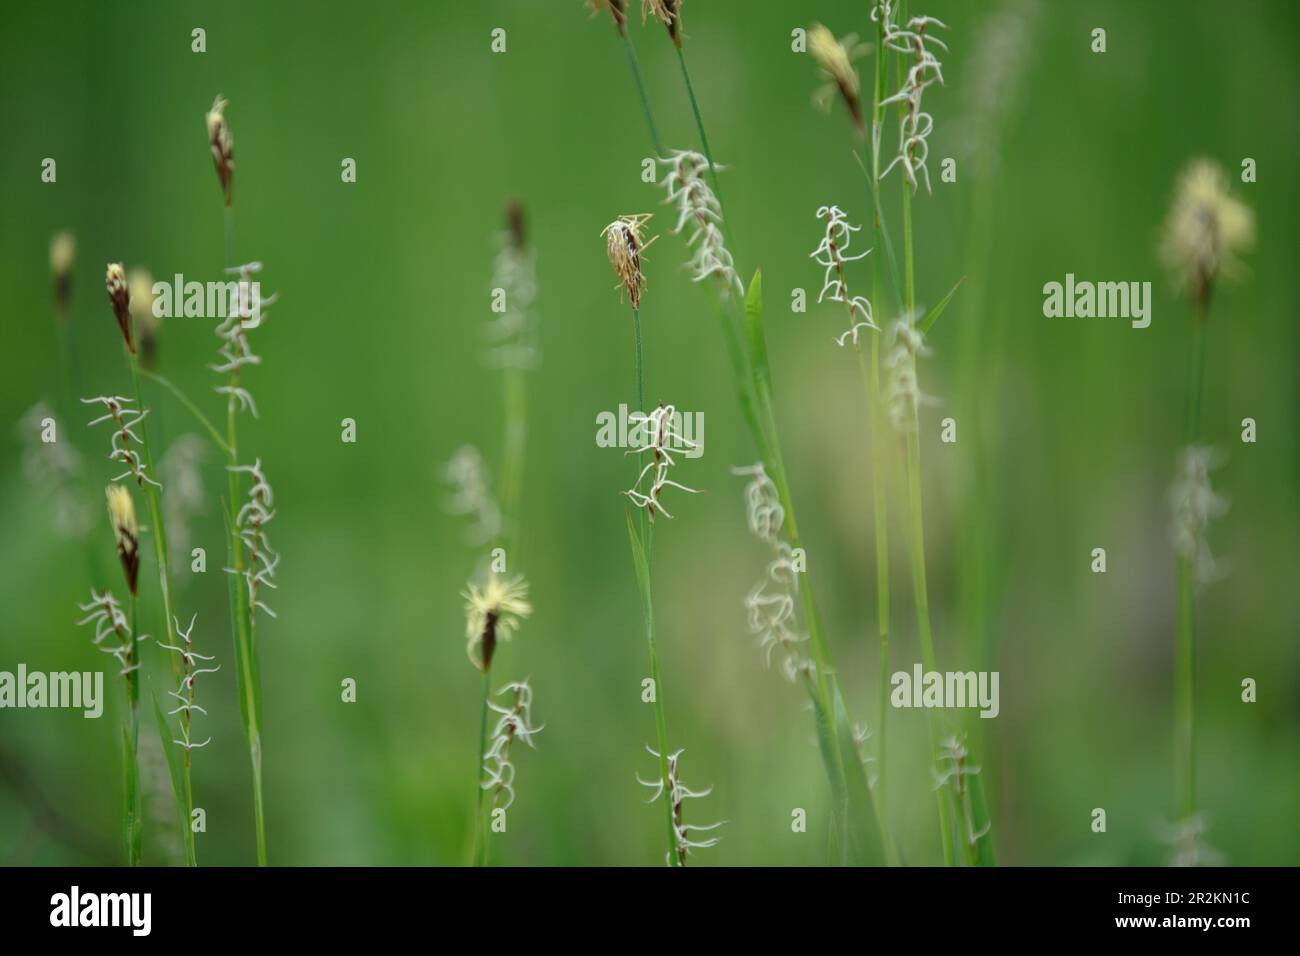 Sedge. Carex cespitosa. Young green grass. Spring grass, weed on a blurry natural background. Flowering fluffy spikelets of sedge. Stock Photo